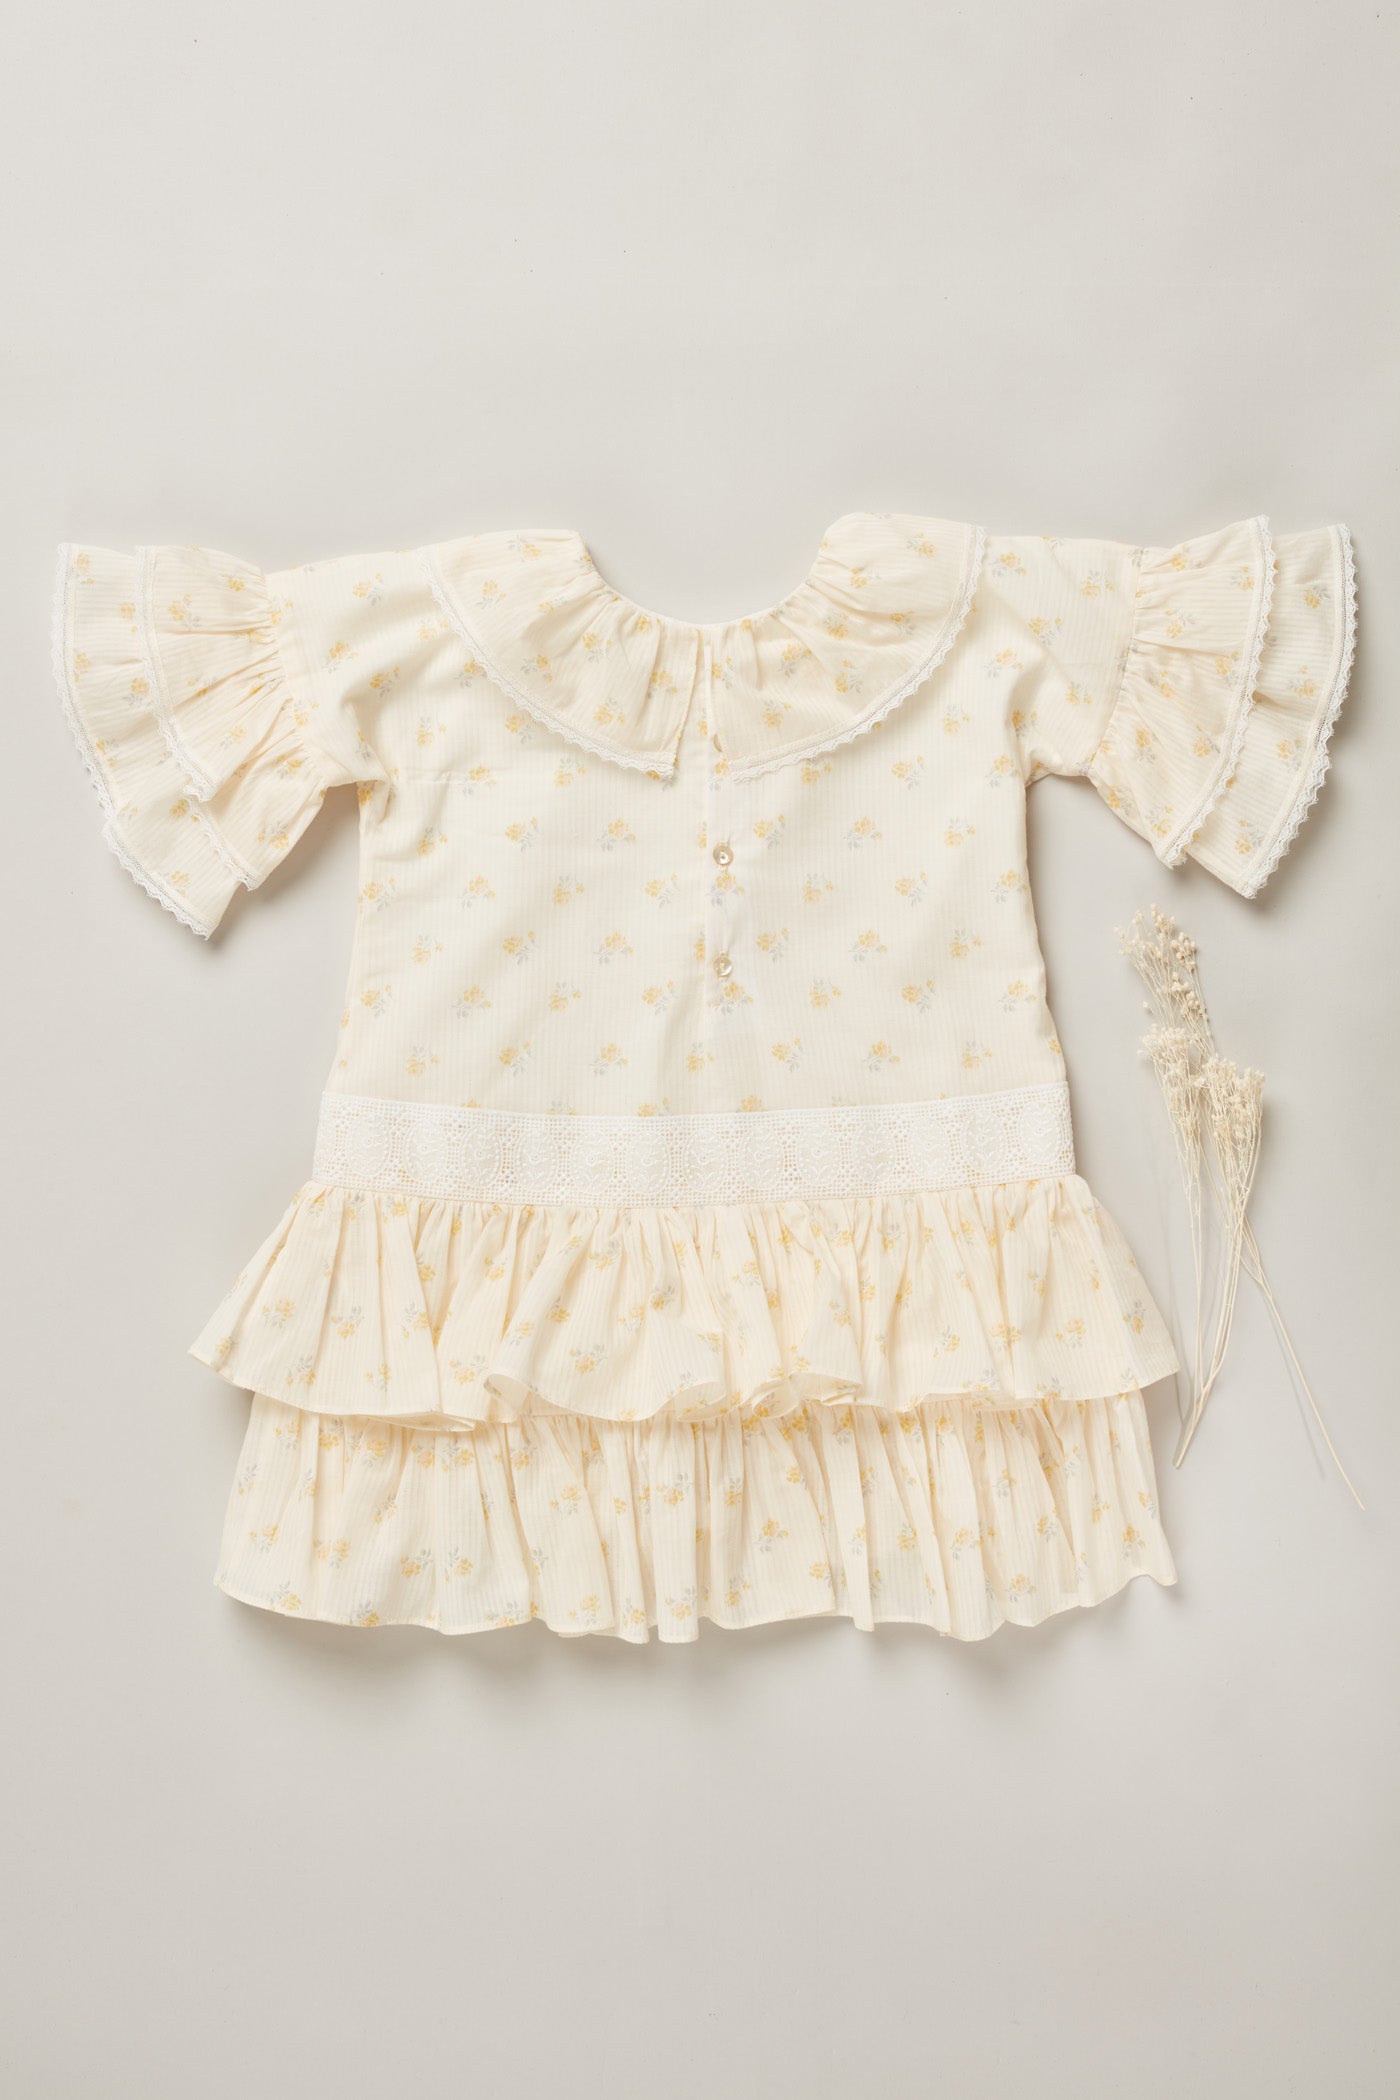 Baby Pastry Dress in Yellow Flowers